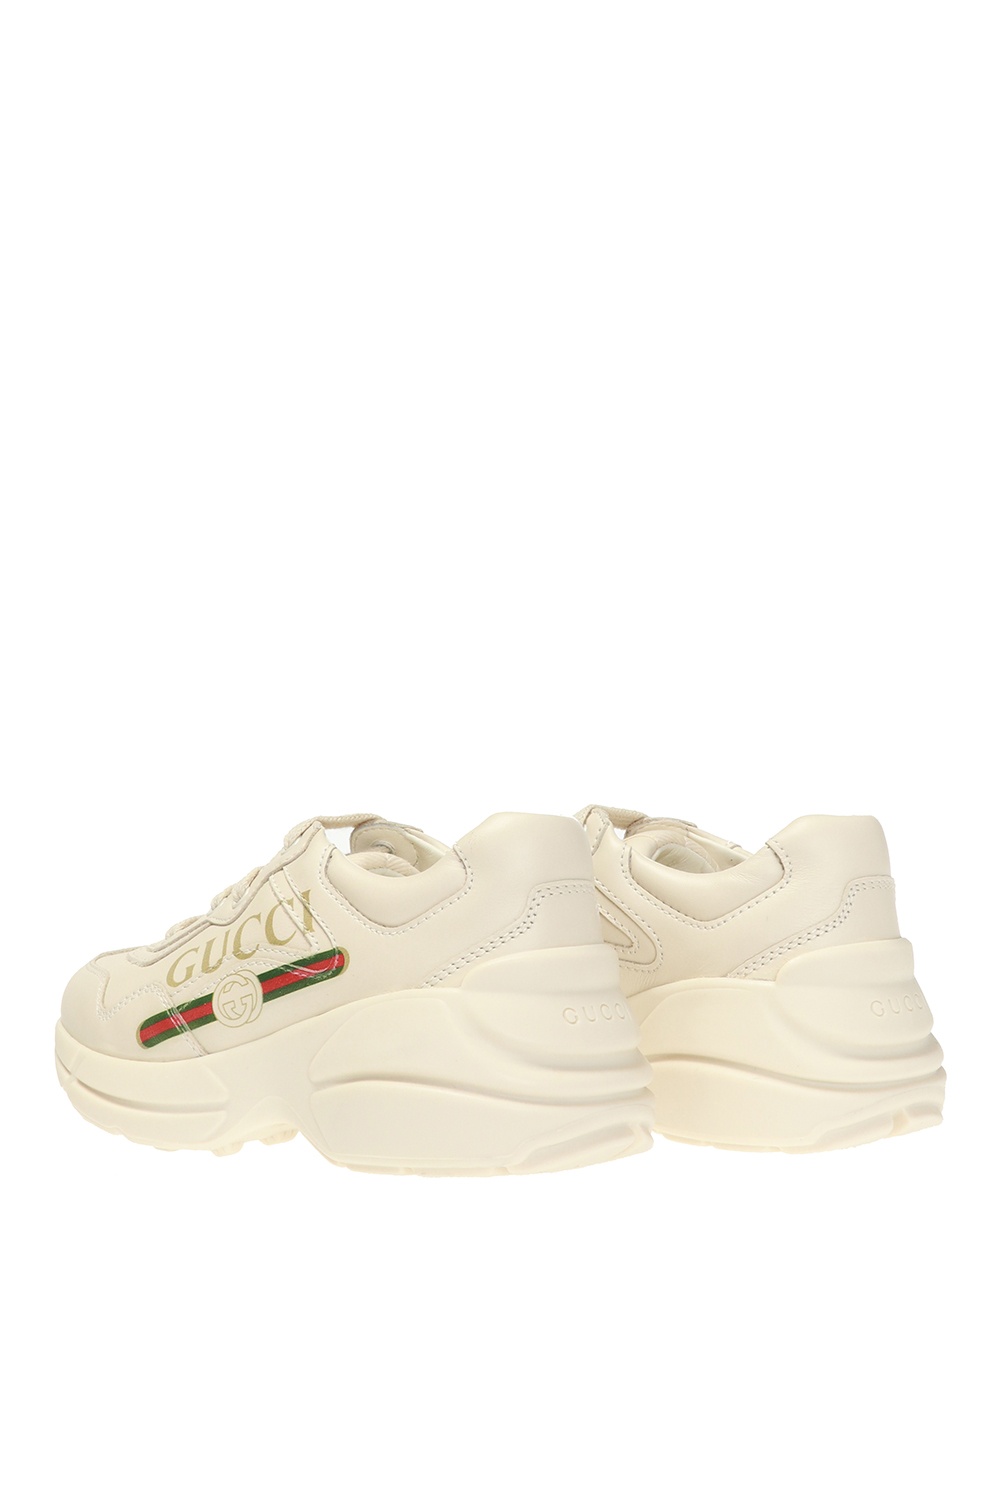 Gucci Kids ‘Rhyton’ sneakers with logo